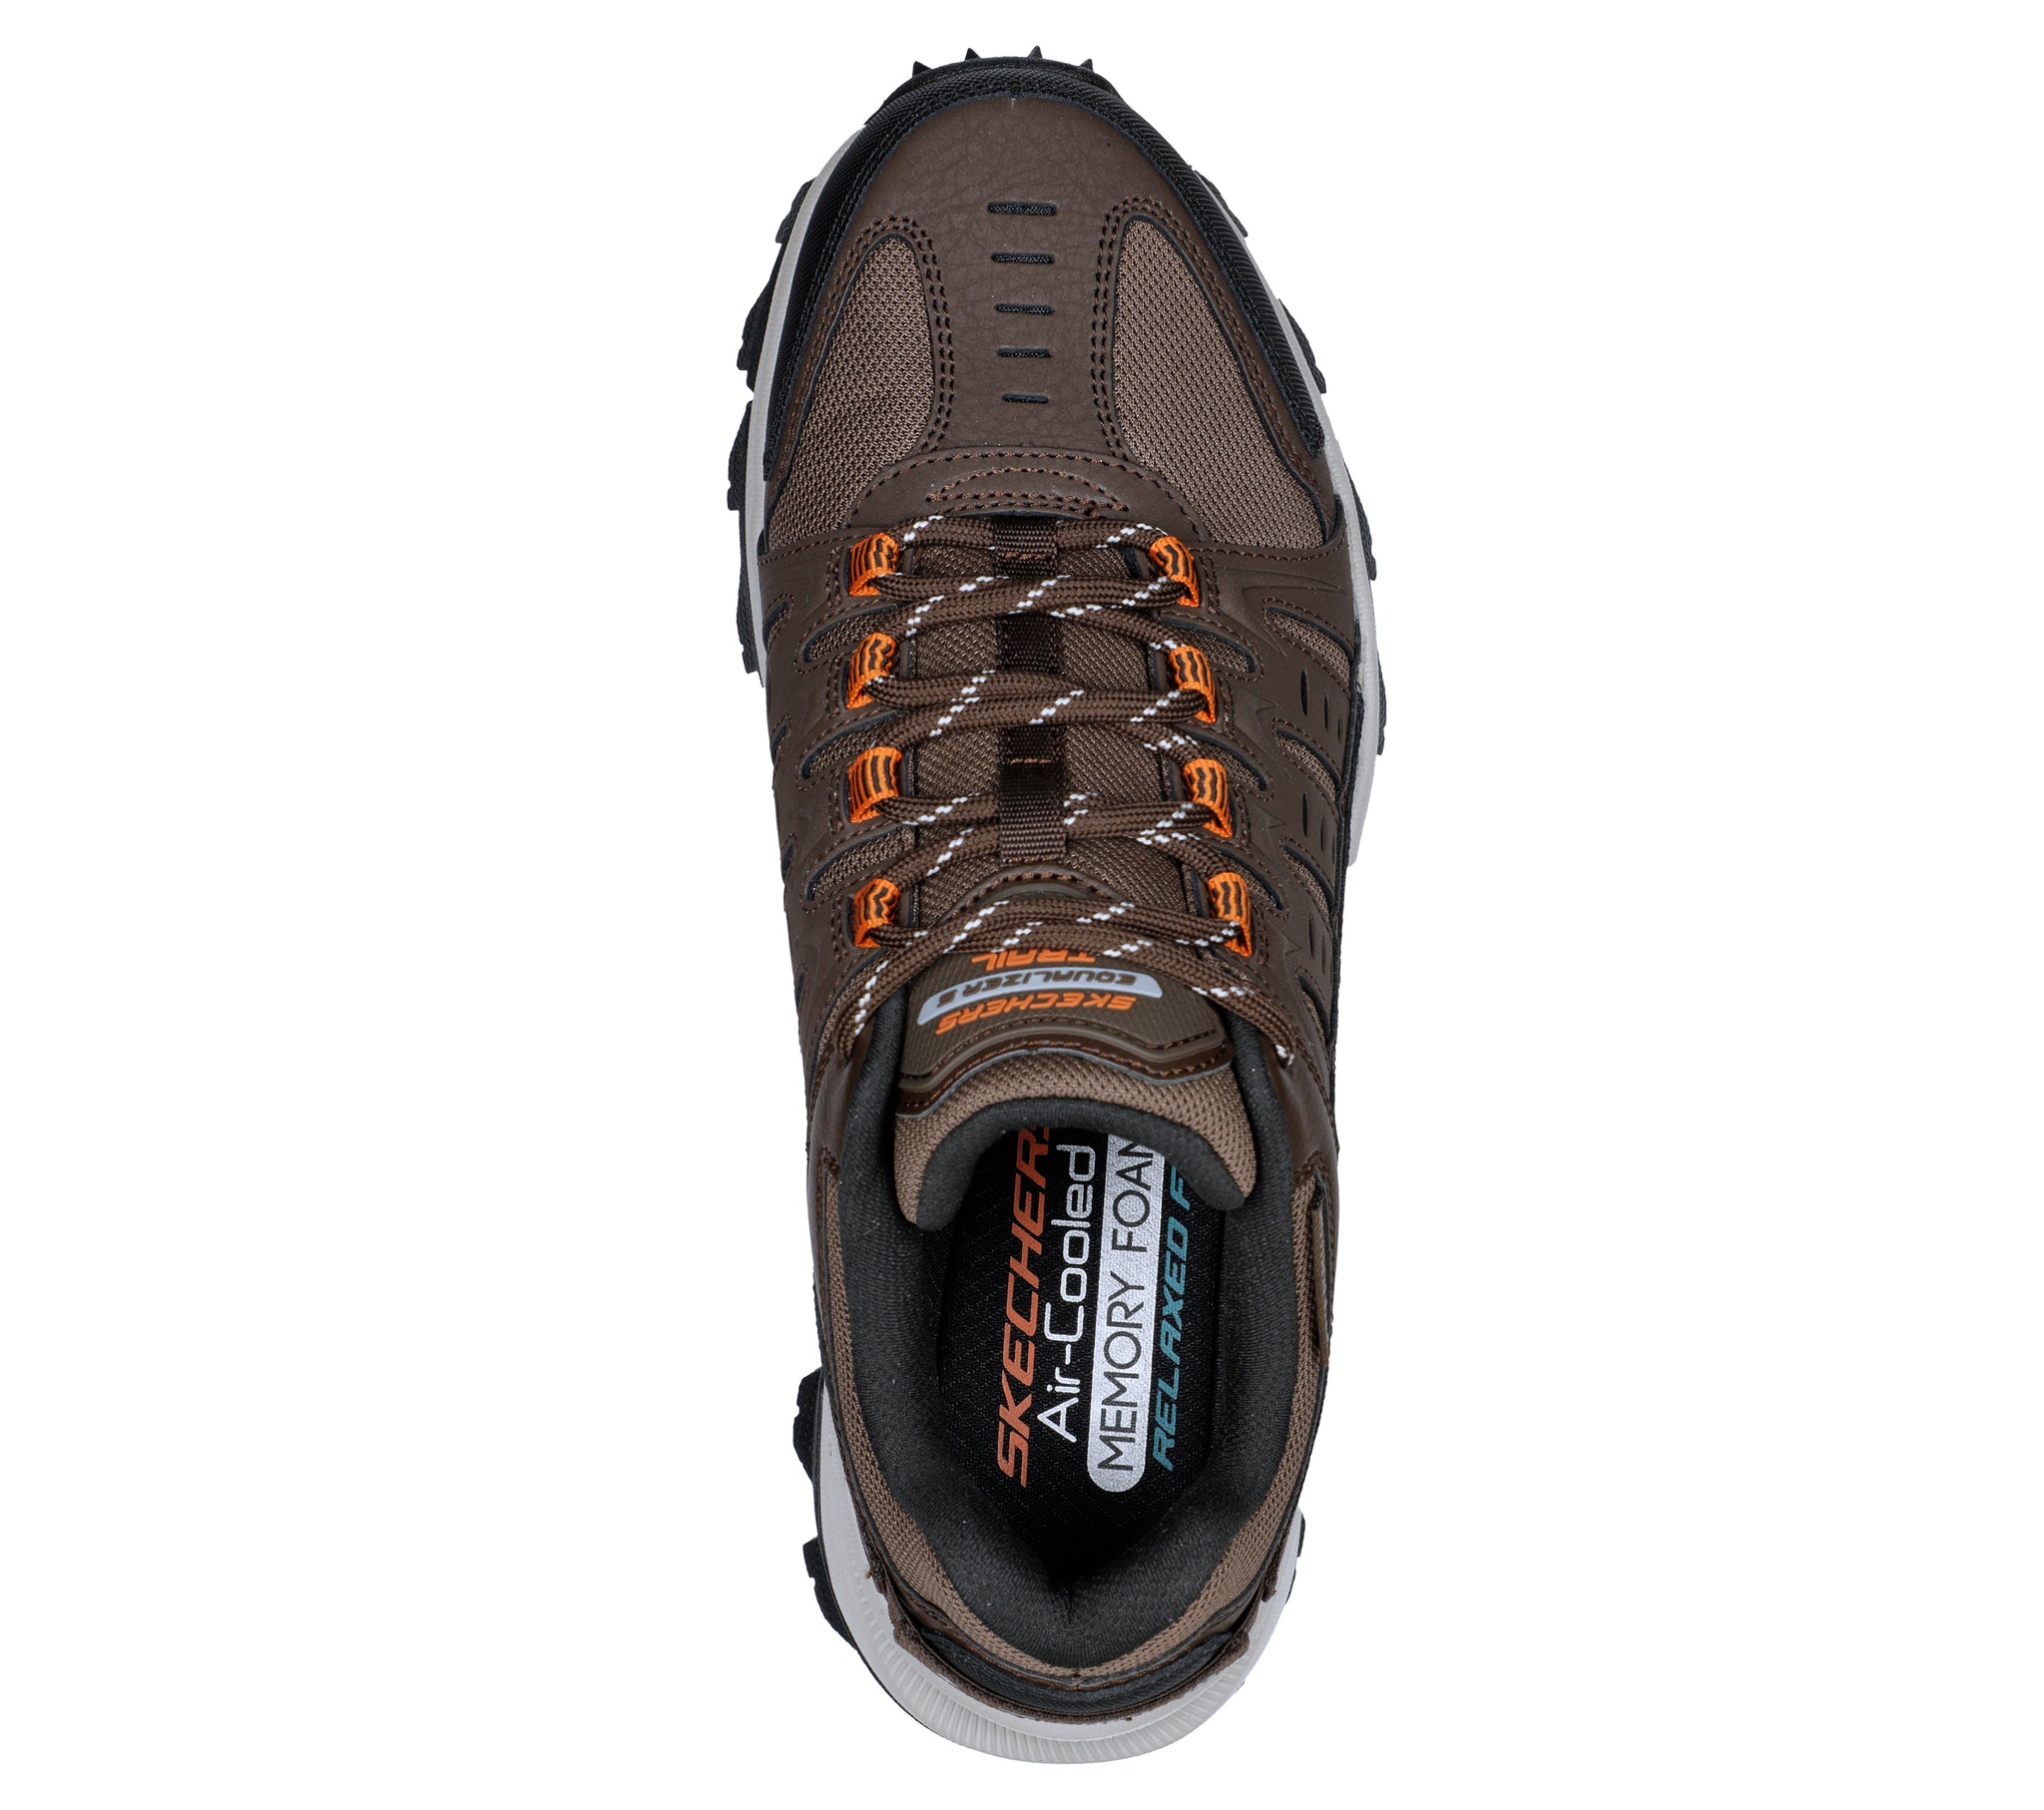 237501 - RELAXED FIT: EQUALIZER 5.0 TRAIL - SOLIX